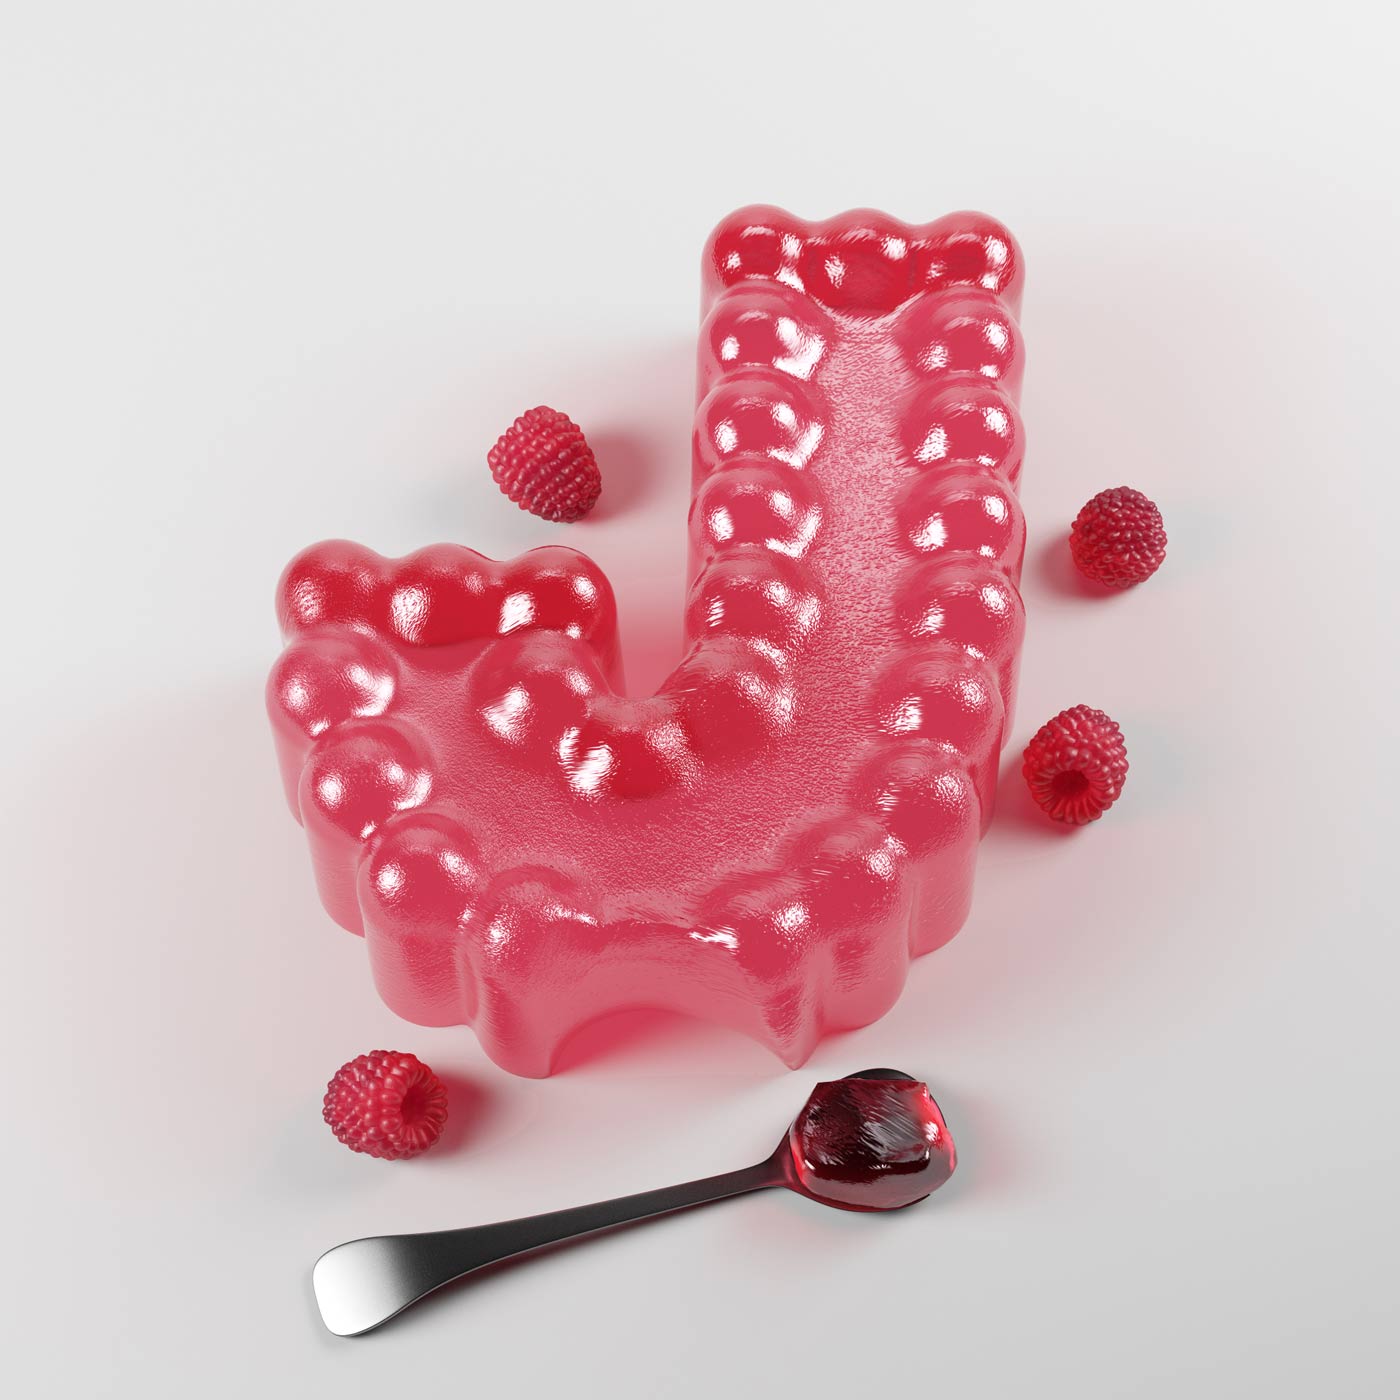 FOOD 3DFOOD FOODALPHABET CESS 3D 3DTYPE LETTERING CGI 3DARTIST JELLY